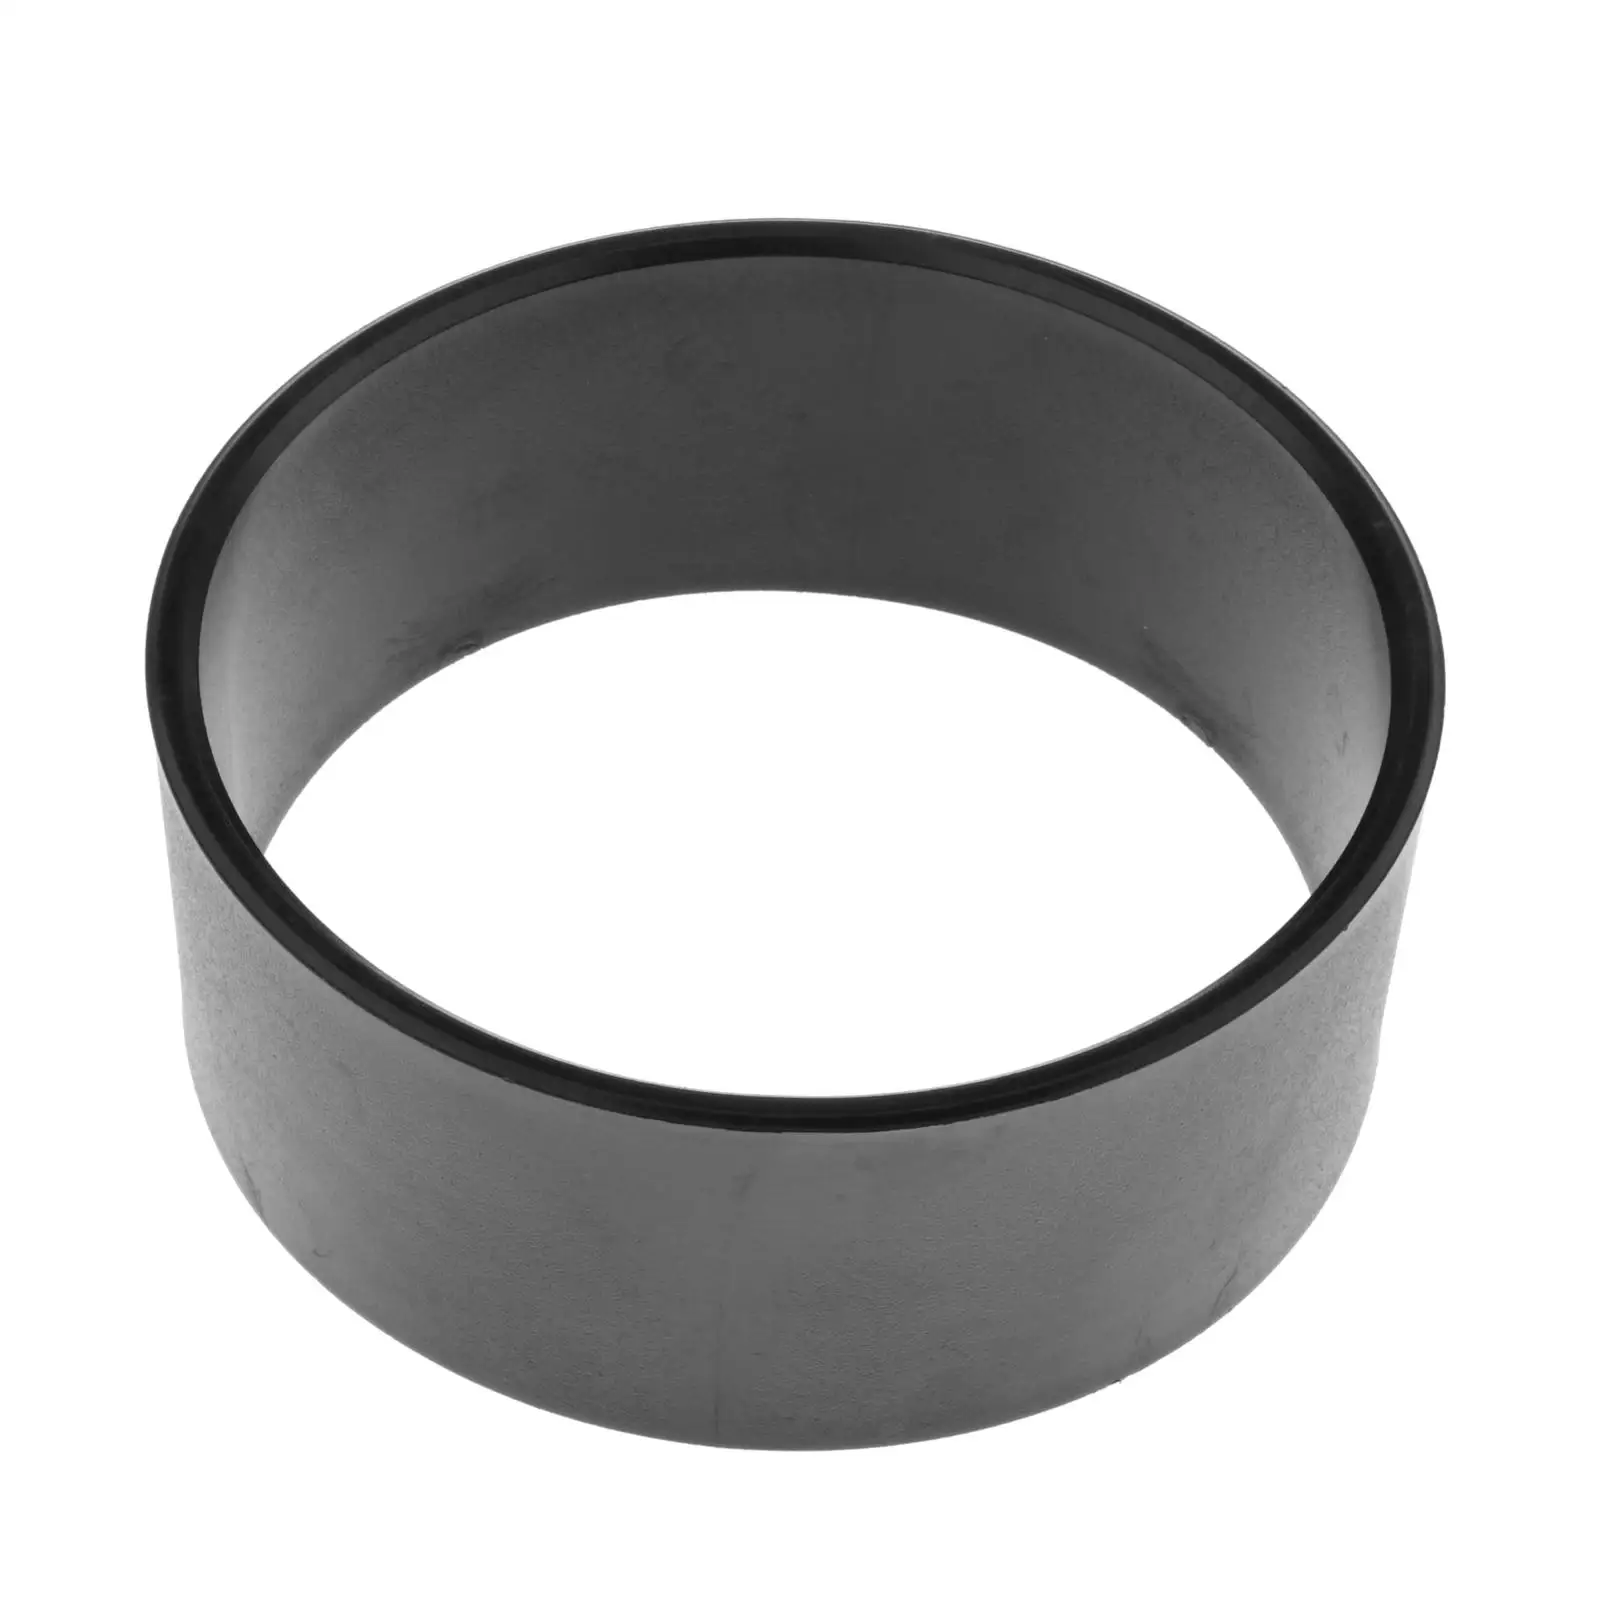 Wear Ring 155mm 271000653 for Sea Doo GSX GTX RX 3D GTI Professional Spare Parts